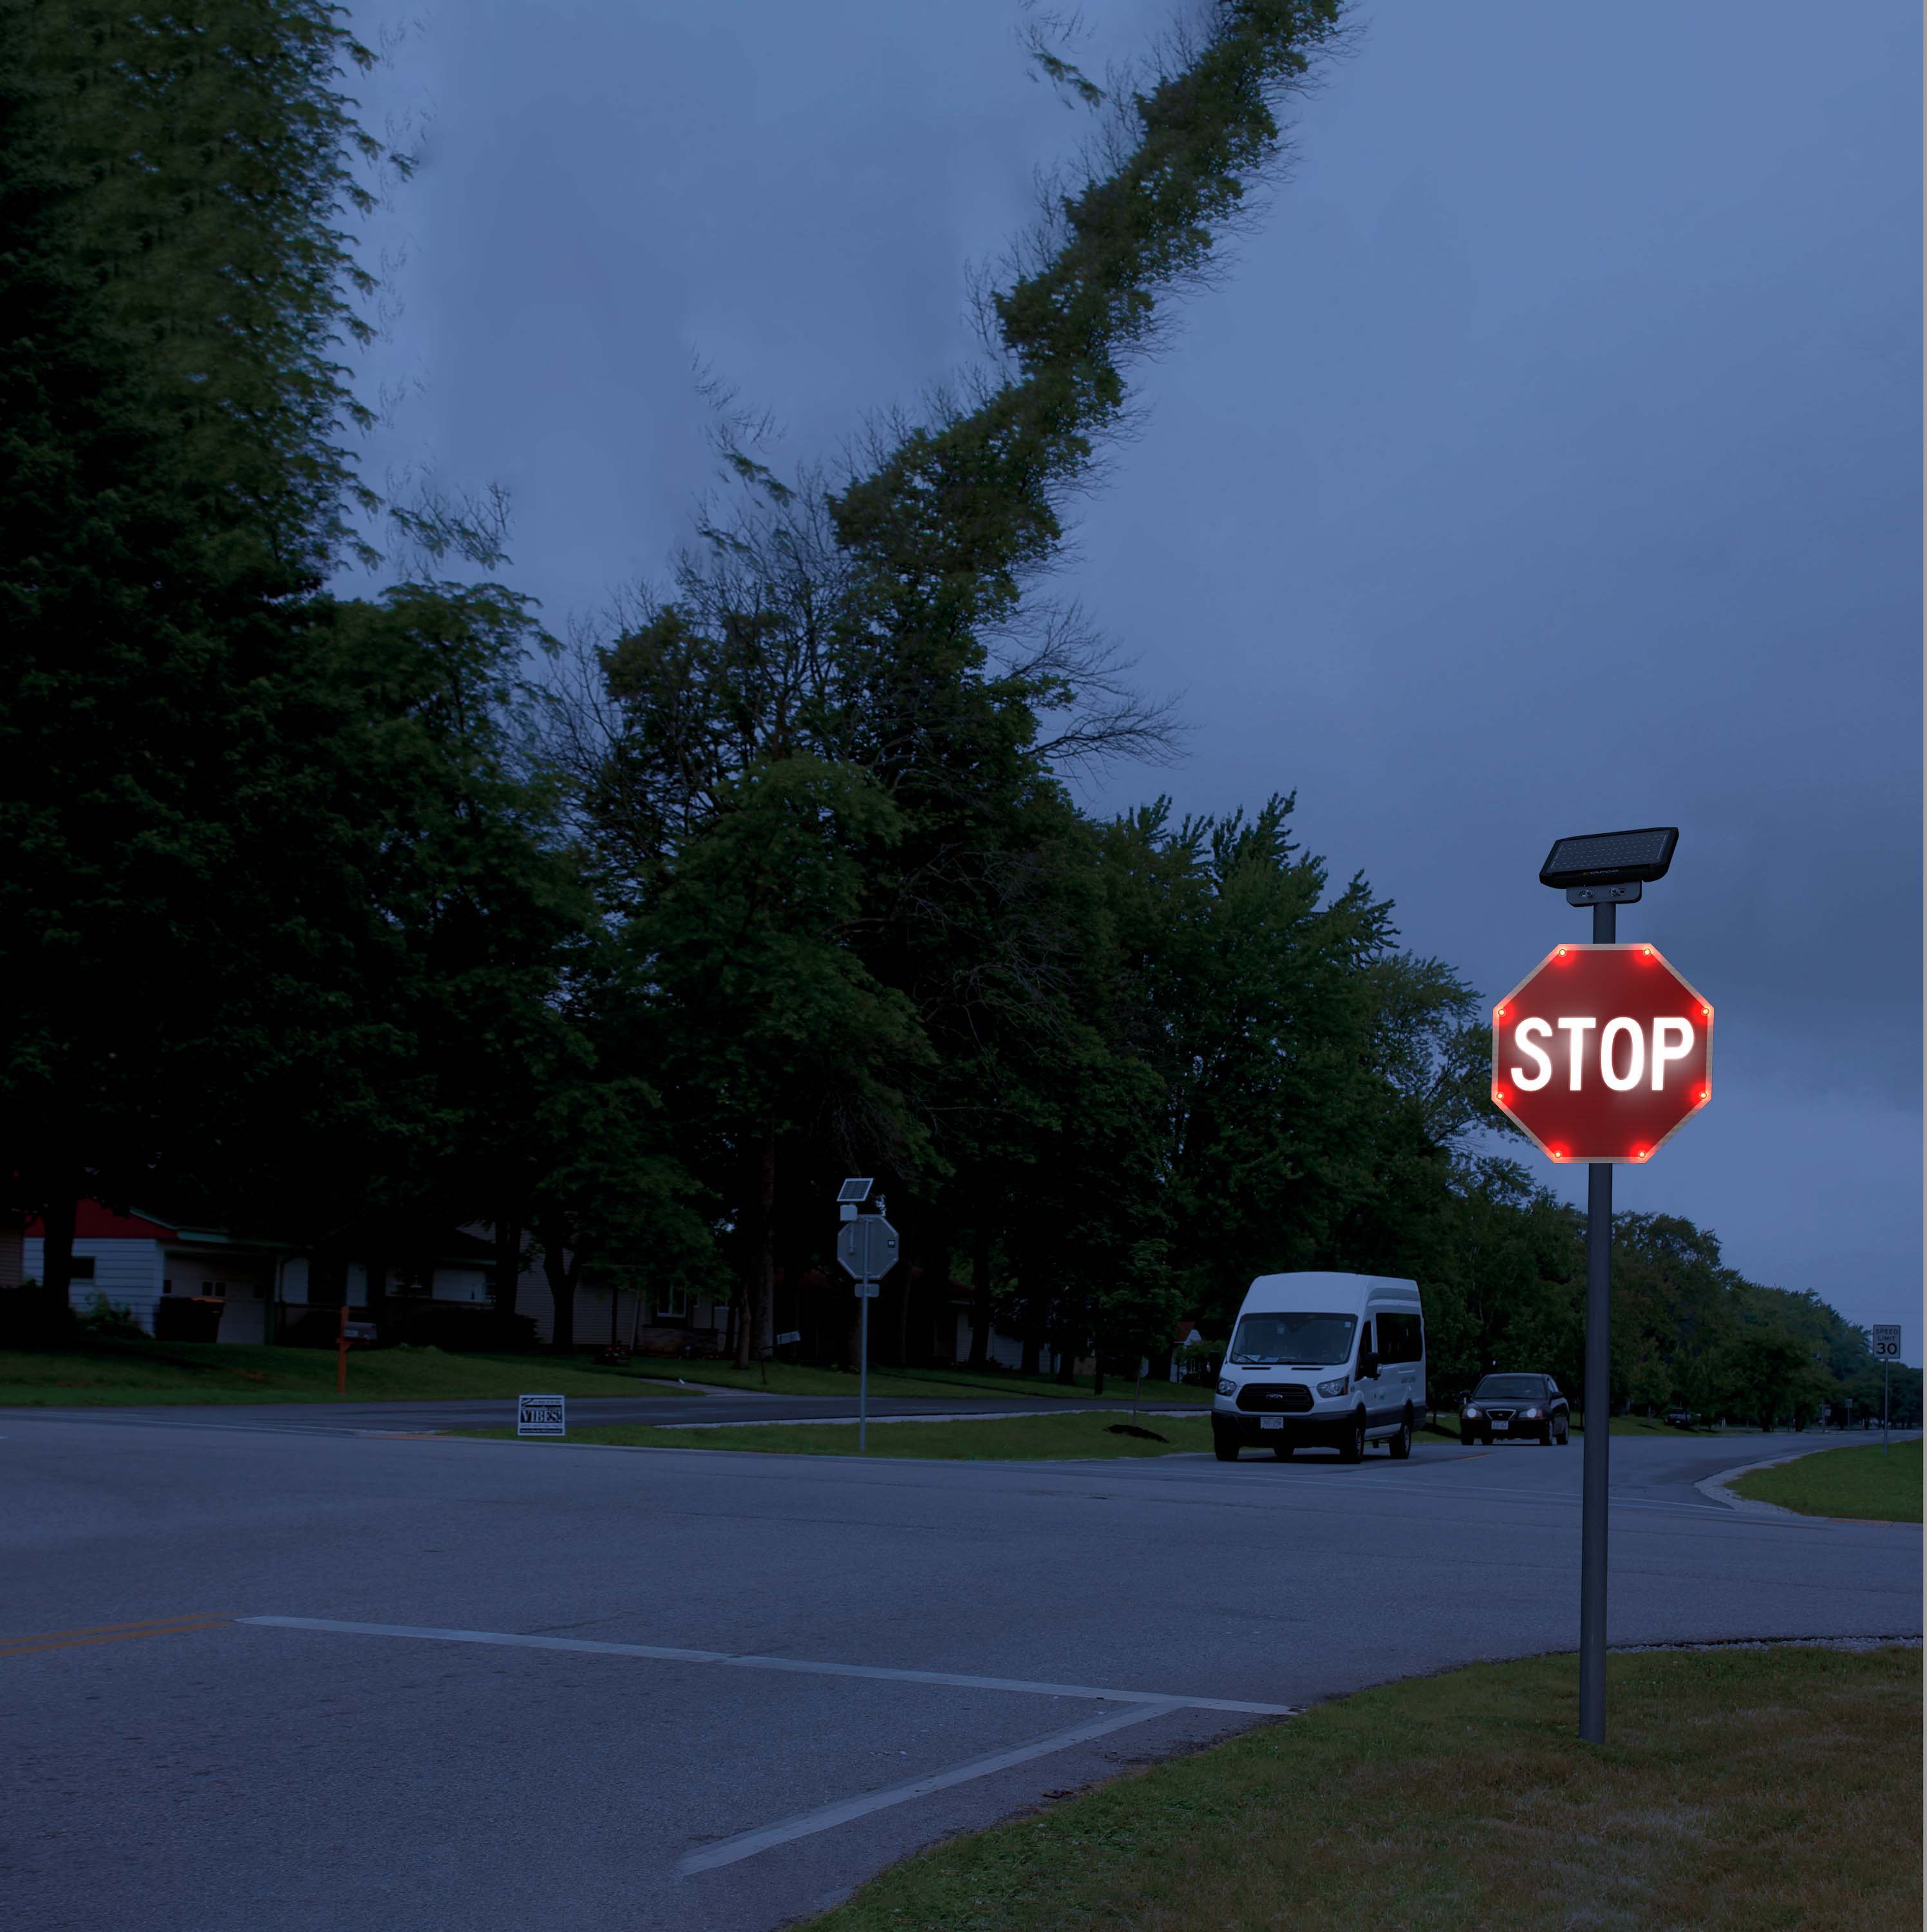 A flashing stop sign placed at an intersection.